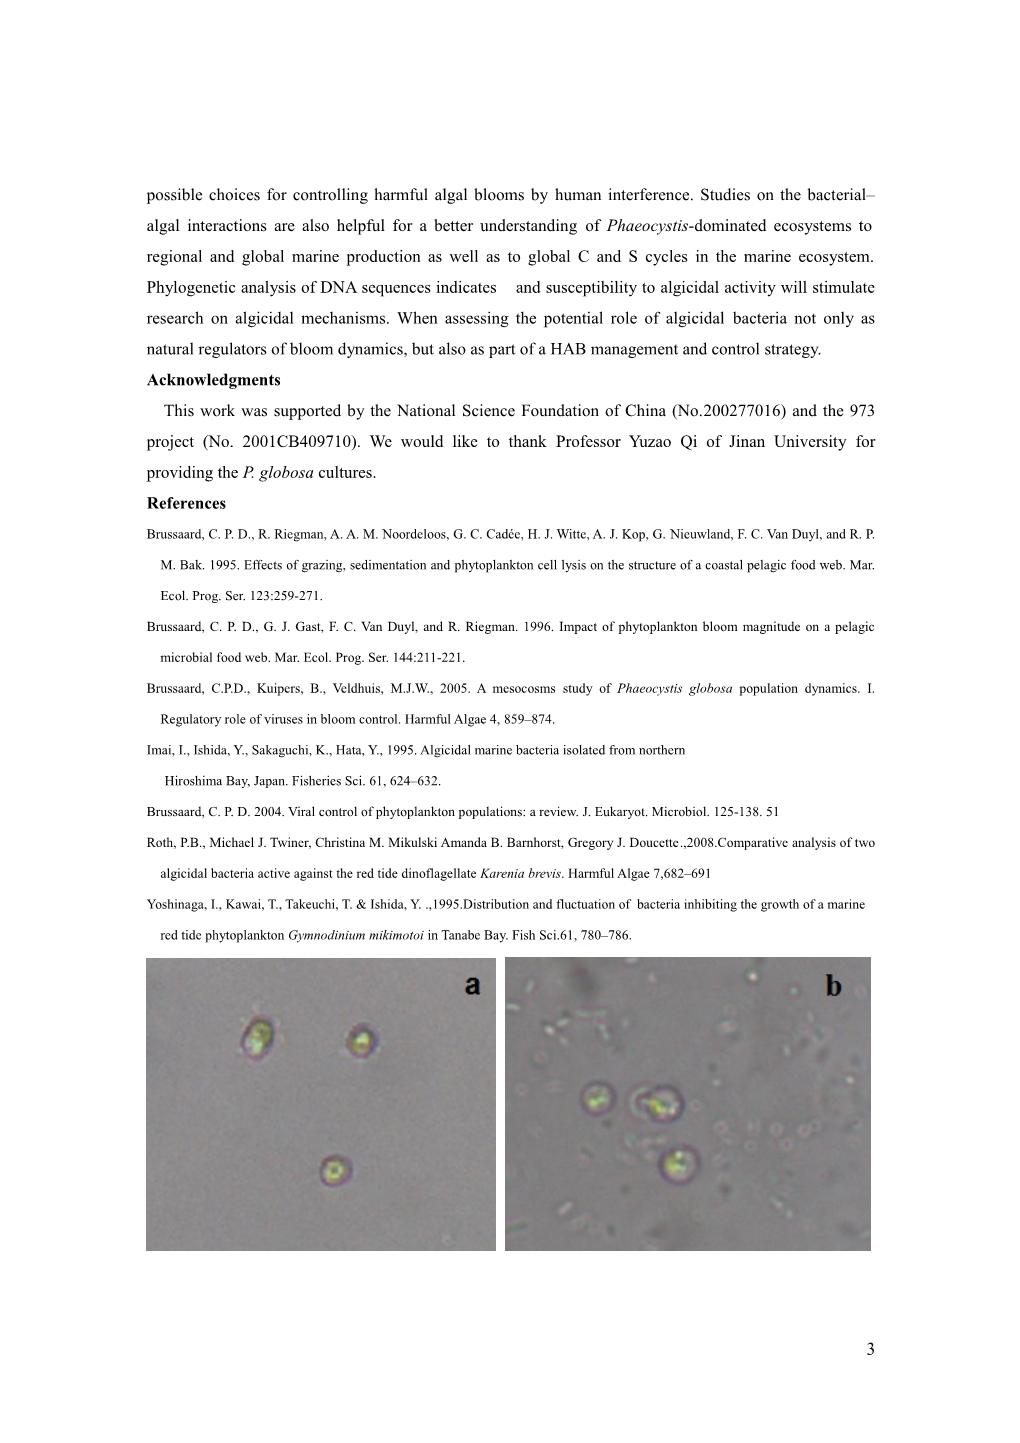 Isolation and Characterization of Two Marine Algicidal Bacteria Against the Phytoplankton